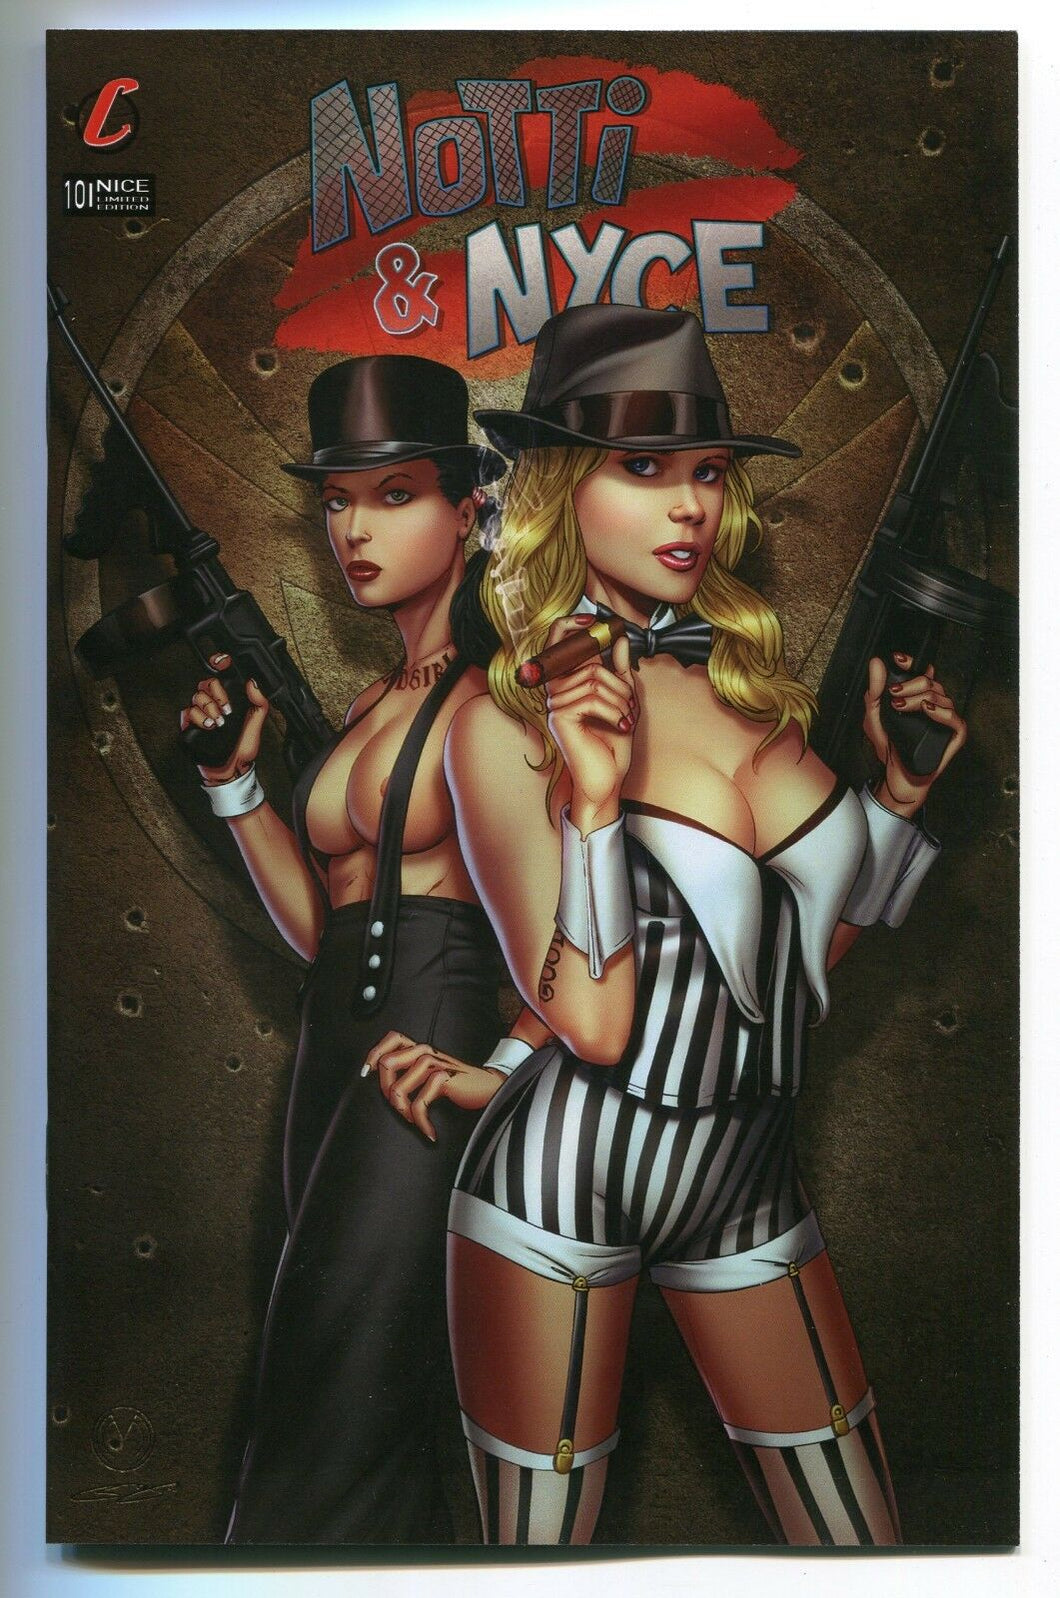 Notti & Nyce #10 Marat Mychaels NICE Mobster Variant Cover Counterpoint SOLD OUT